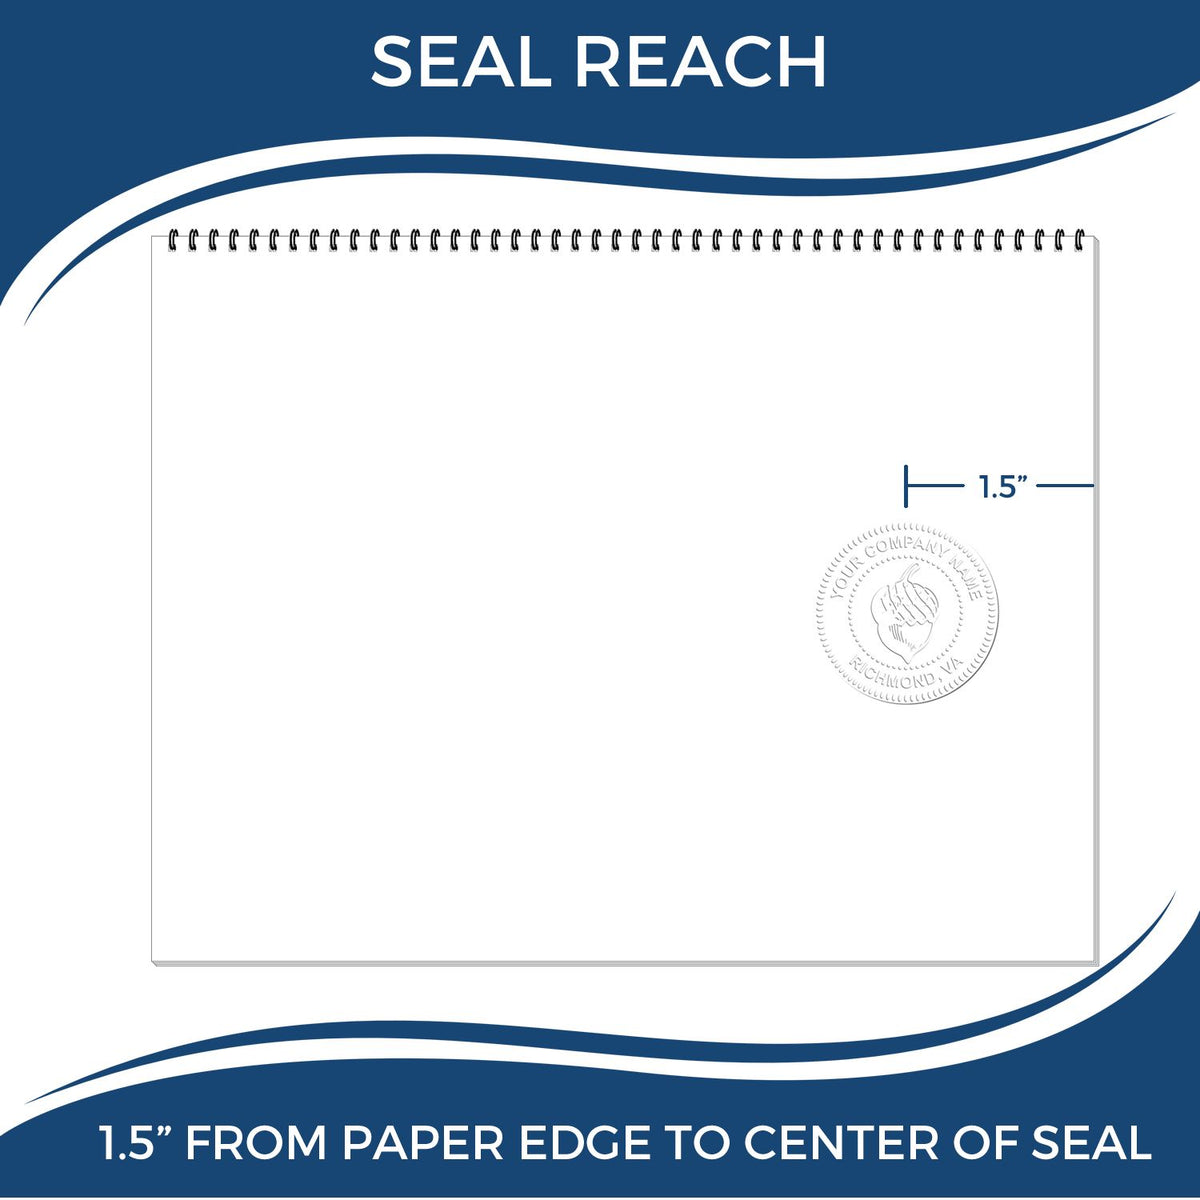 An infographic showing the seal reach which is represented by a ruler and a miniature seal image of the Gift Indiana Geologist Seal